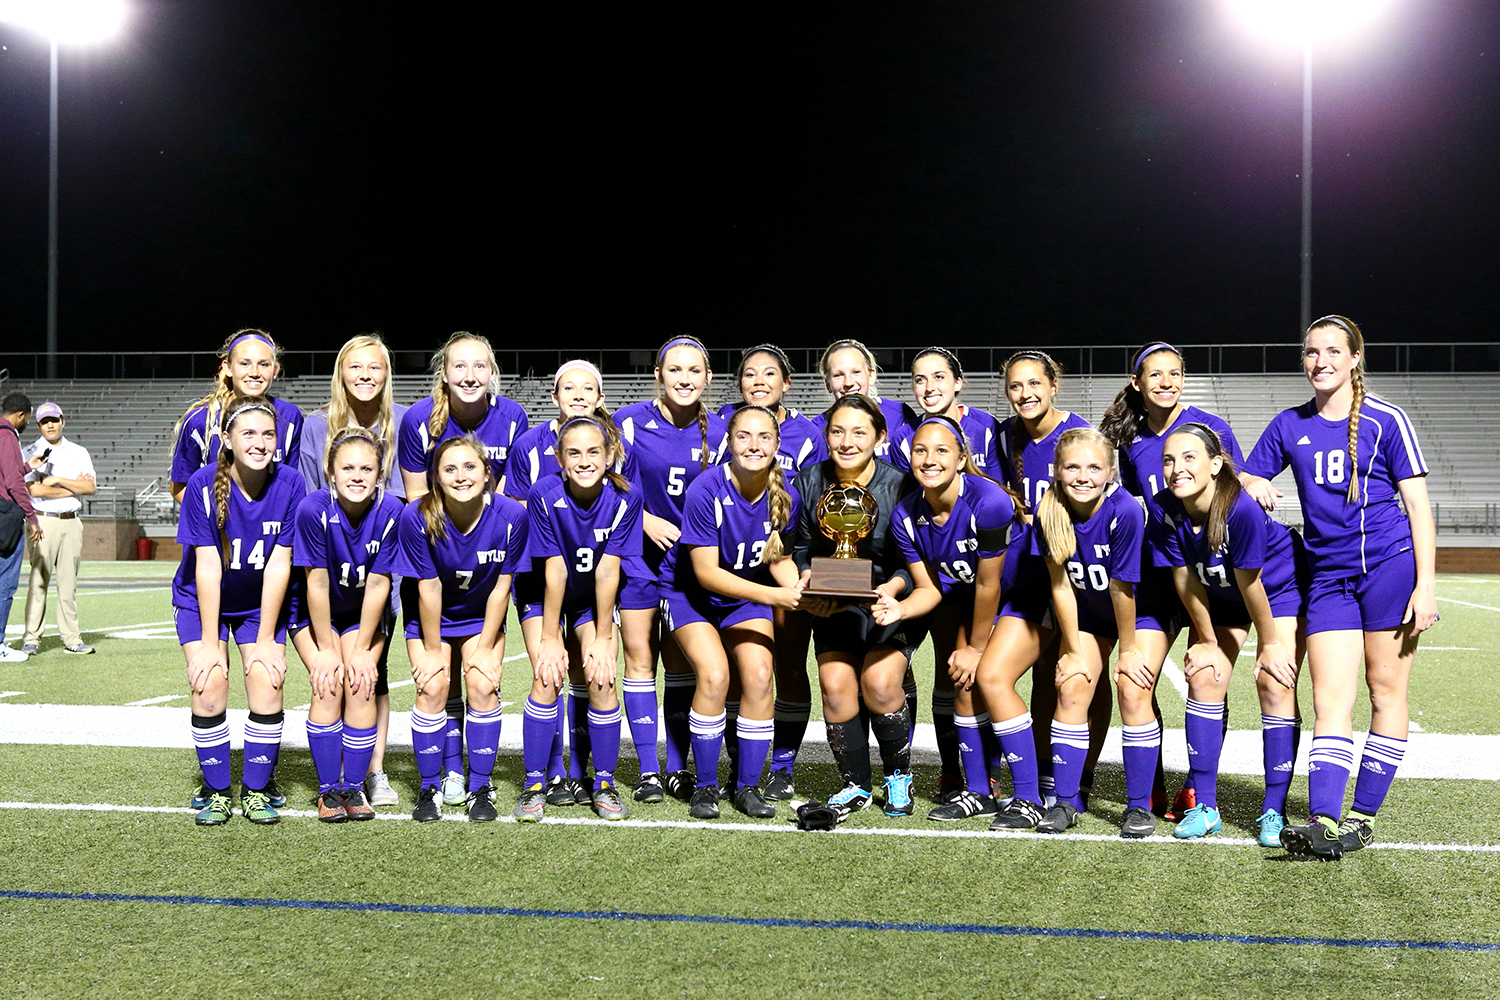 Girls Soccer Team Makes History - The Wylie Growl